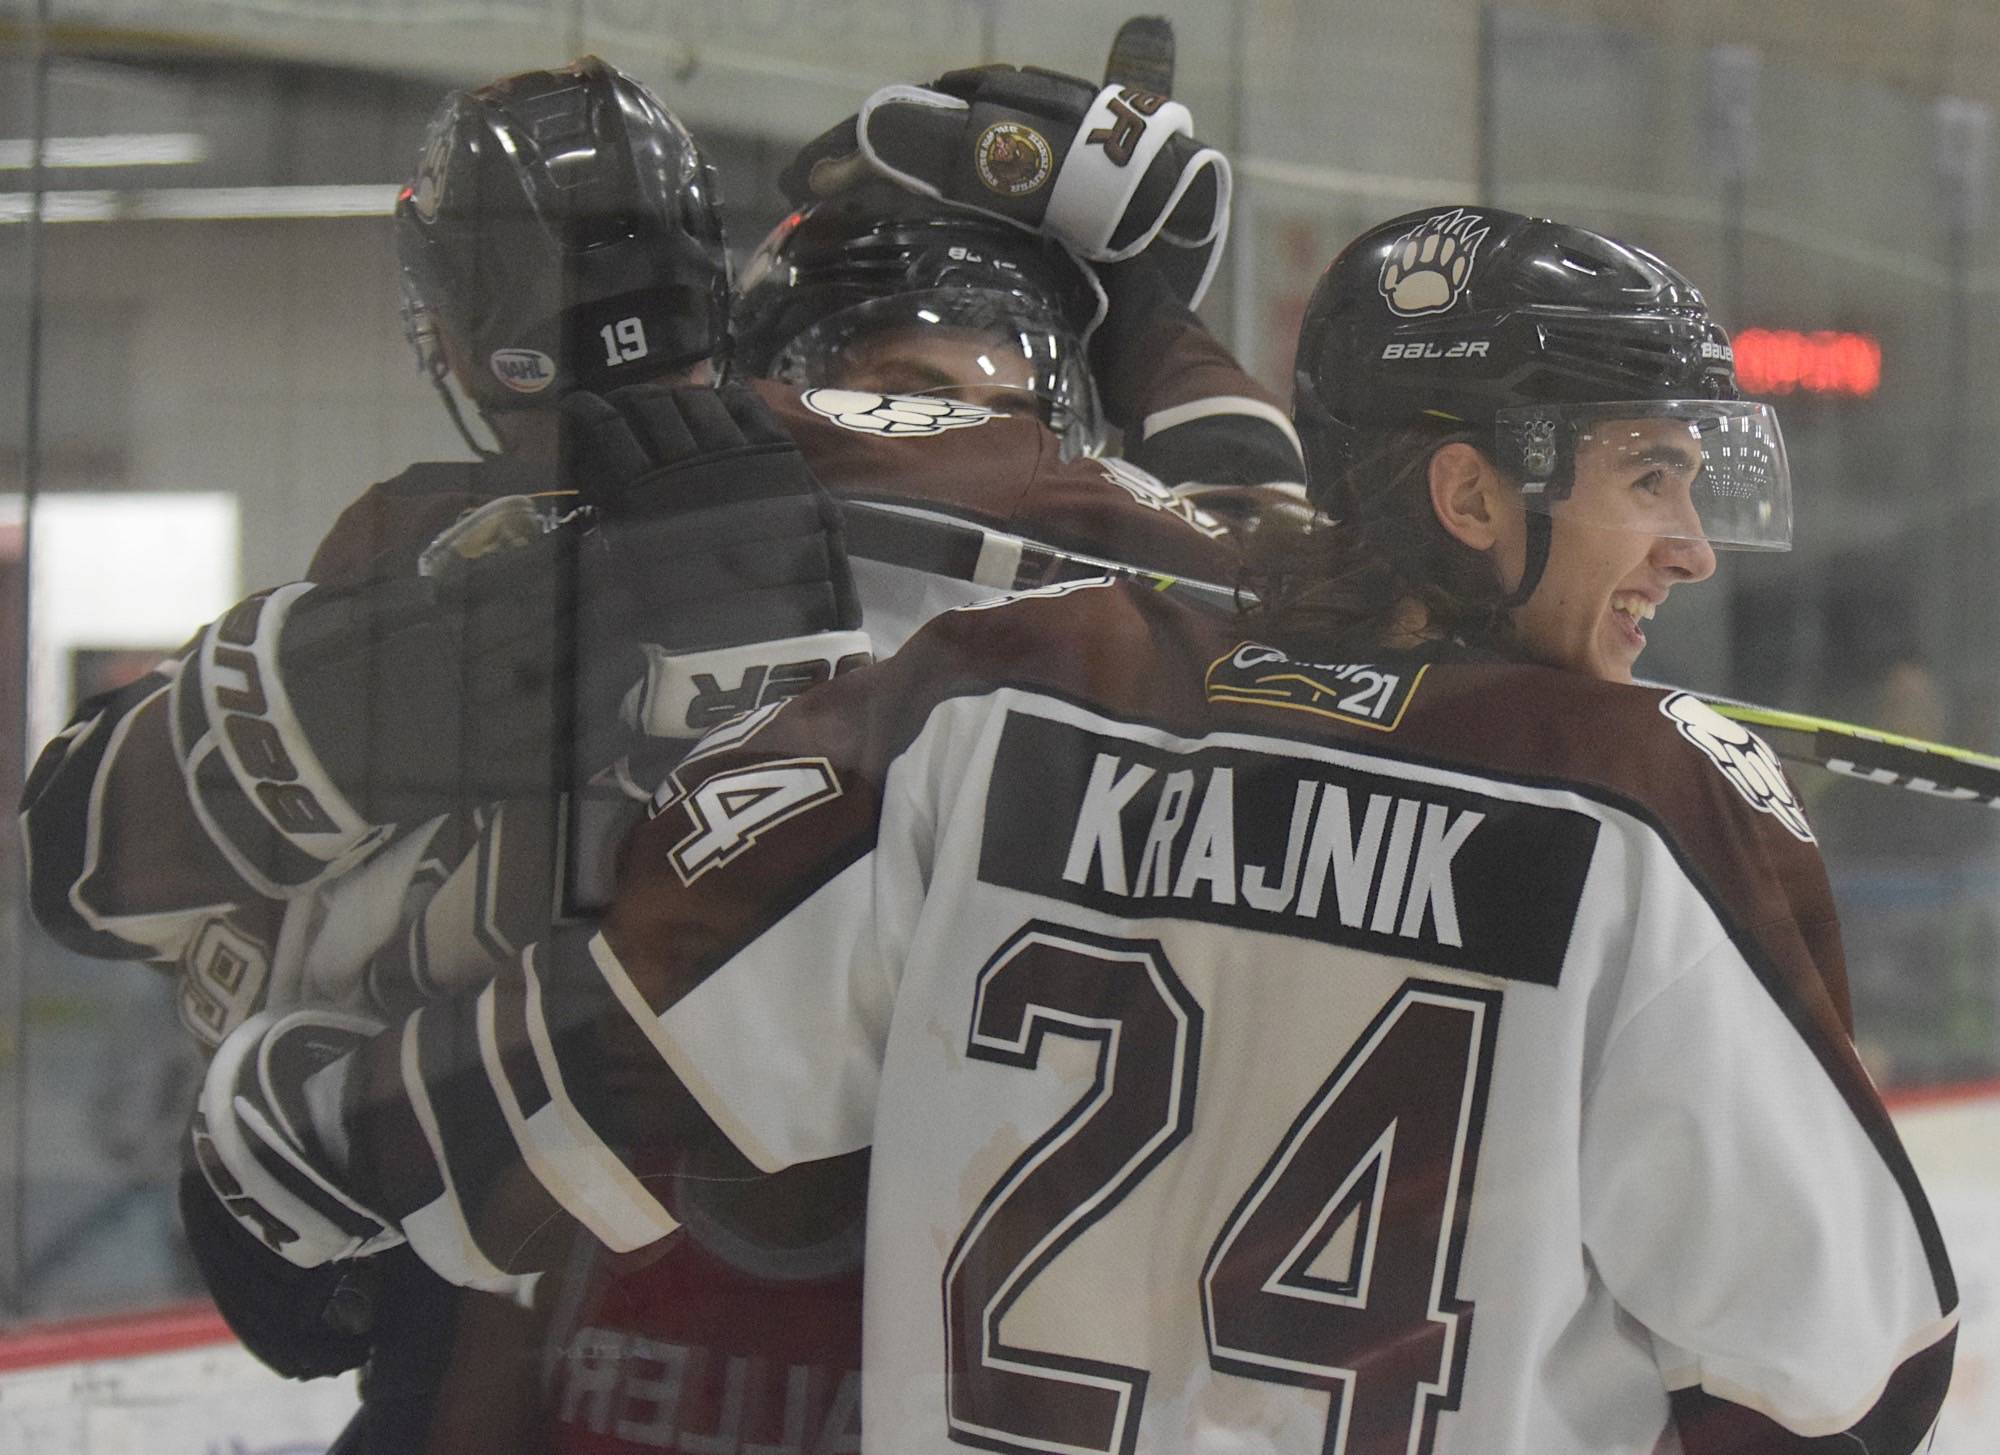 Eagle River’s Zach Krajnik and teammates celebrate the second-period goal of Michael Spethmann against the Chippewa (Wisconsin) Steel on Friday, Oct. 5, 2018, at the Soldotna Regional Sports Complex. (Photo by Jeff Helminiak/Peninsula Clarion)